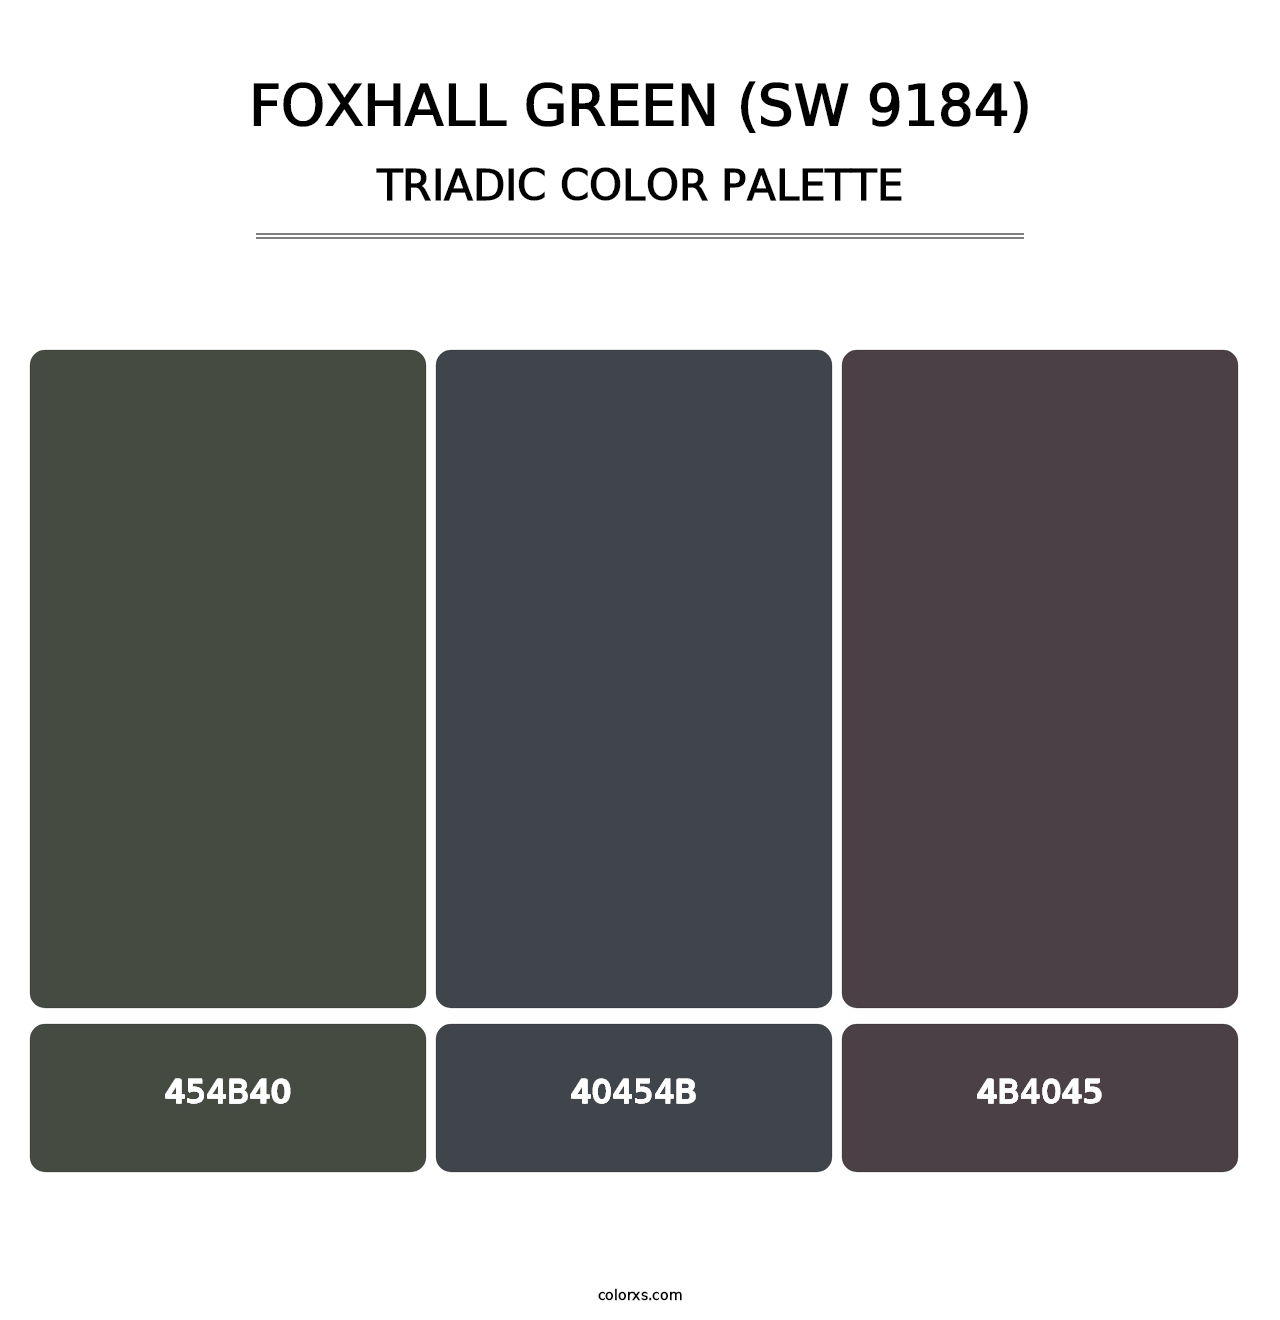 Foxhall Green (SW 9184) - Triadic Color Palette